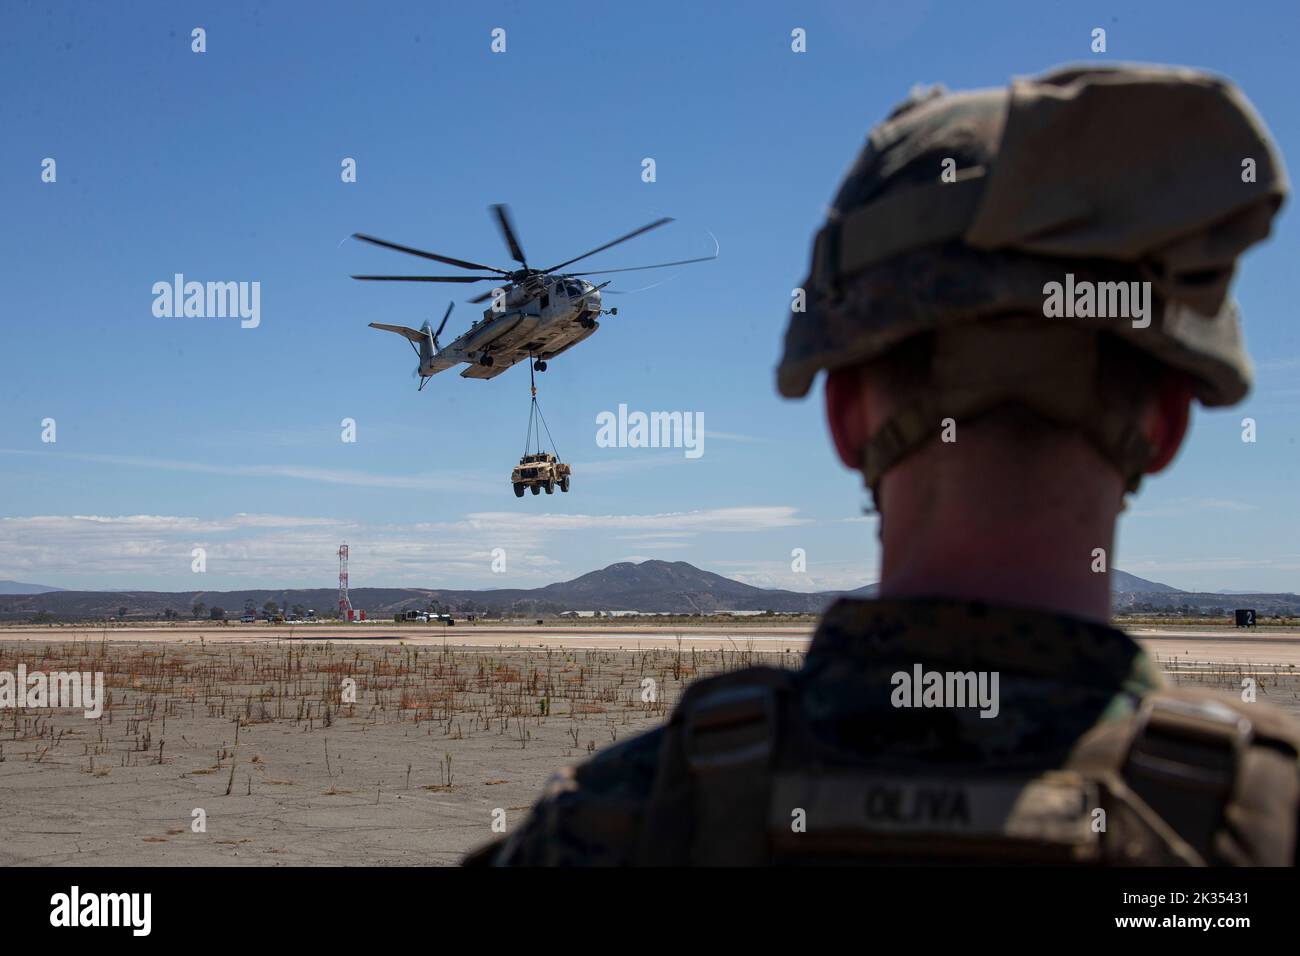 U.S. Marines with Helicopter Support Team, 1st Landing Battalion, 1st Marine Logistics Group, stand by for the drop off of a Joint Light Tactical Vehicle from Marine Heavy Helicopter Squadron 465 during the Marine Air-Ground Task Force demonstration of the 2022 Marine Corps Air Station Miramar Air Show at MCAS Miramar, San Diego, California, Sept. 22, 2022. The MAGTF Demo displays the coordinated use of close-air support, artillery and infantry forces, and provides a visual representation of how the Marine Corps operates. The theme for the 2022 MCAS Miramar Air Show, “Marines Fight, Evolve and Stock Photo